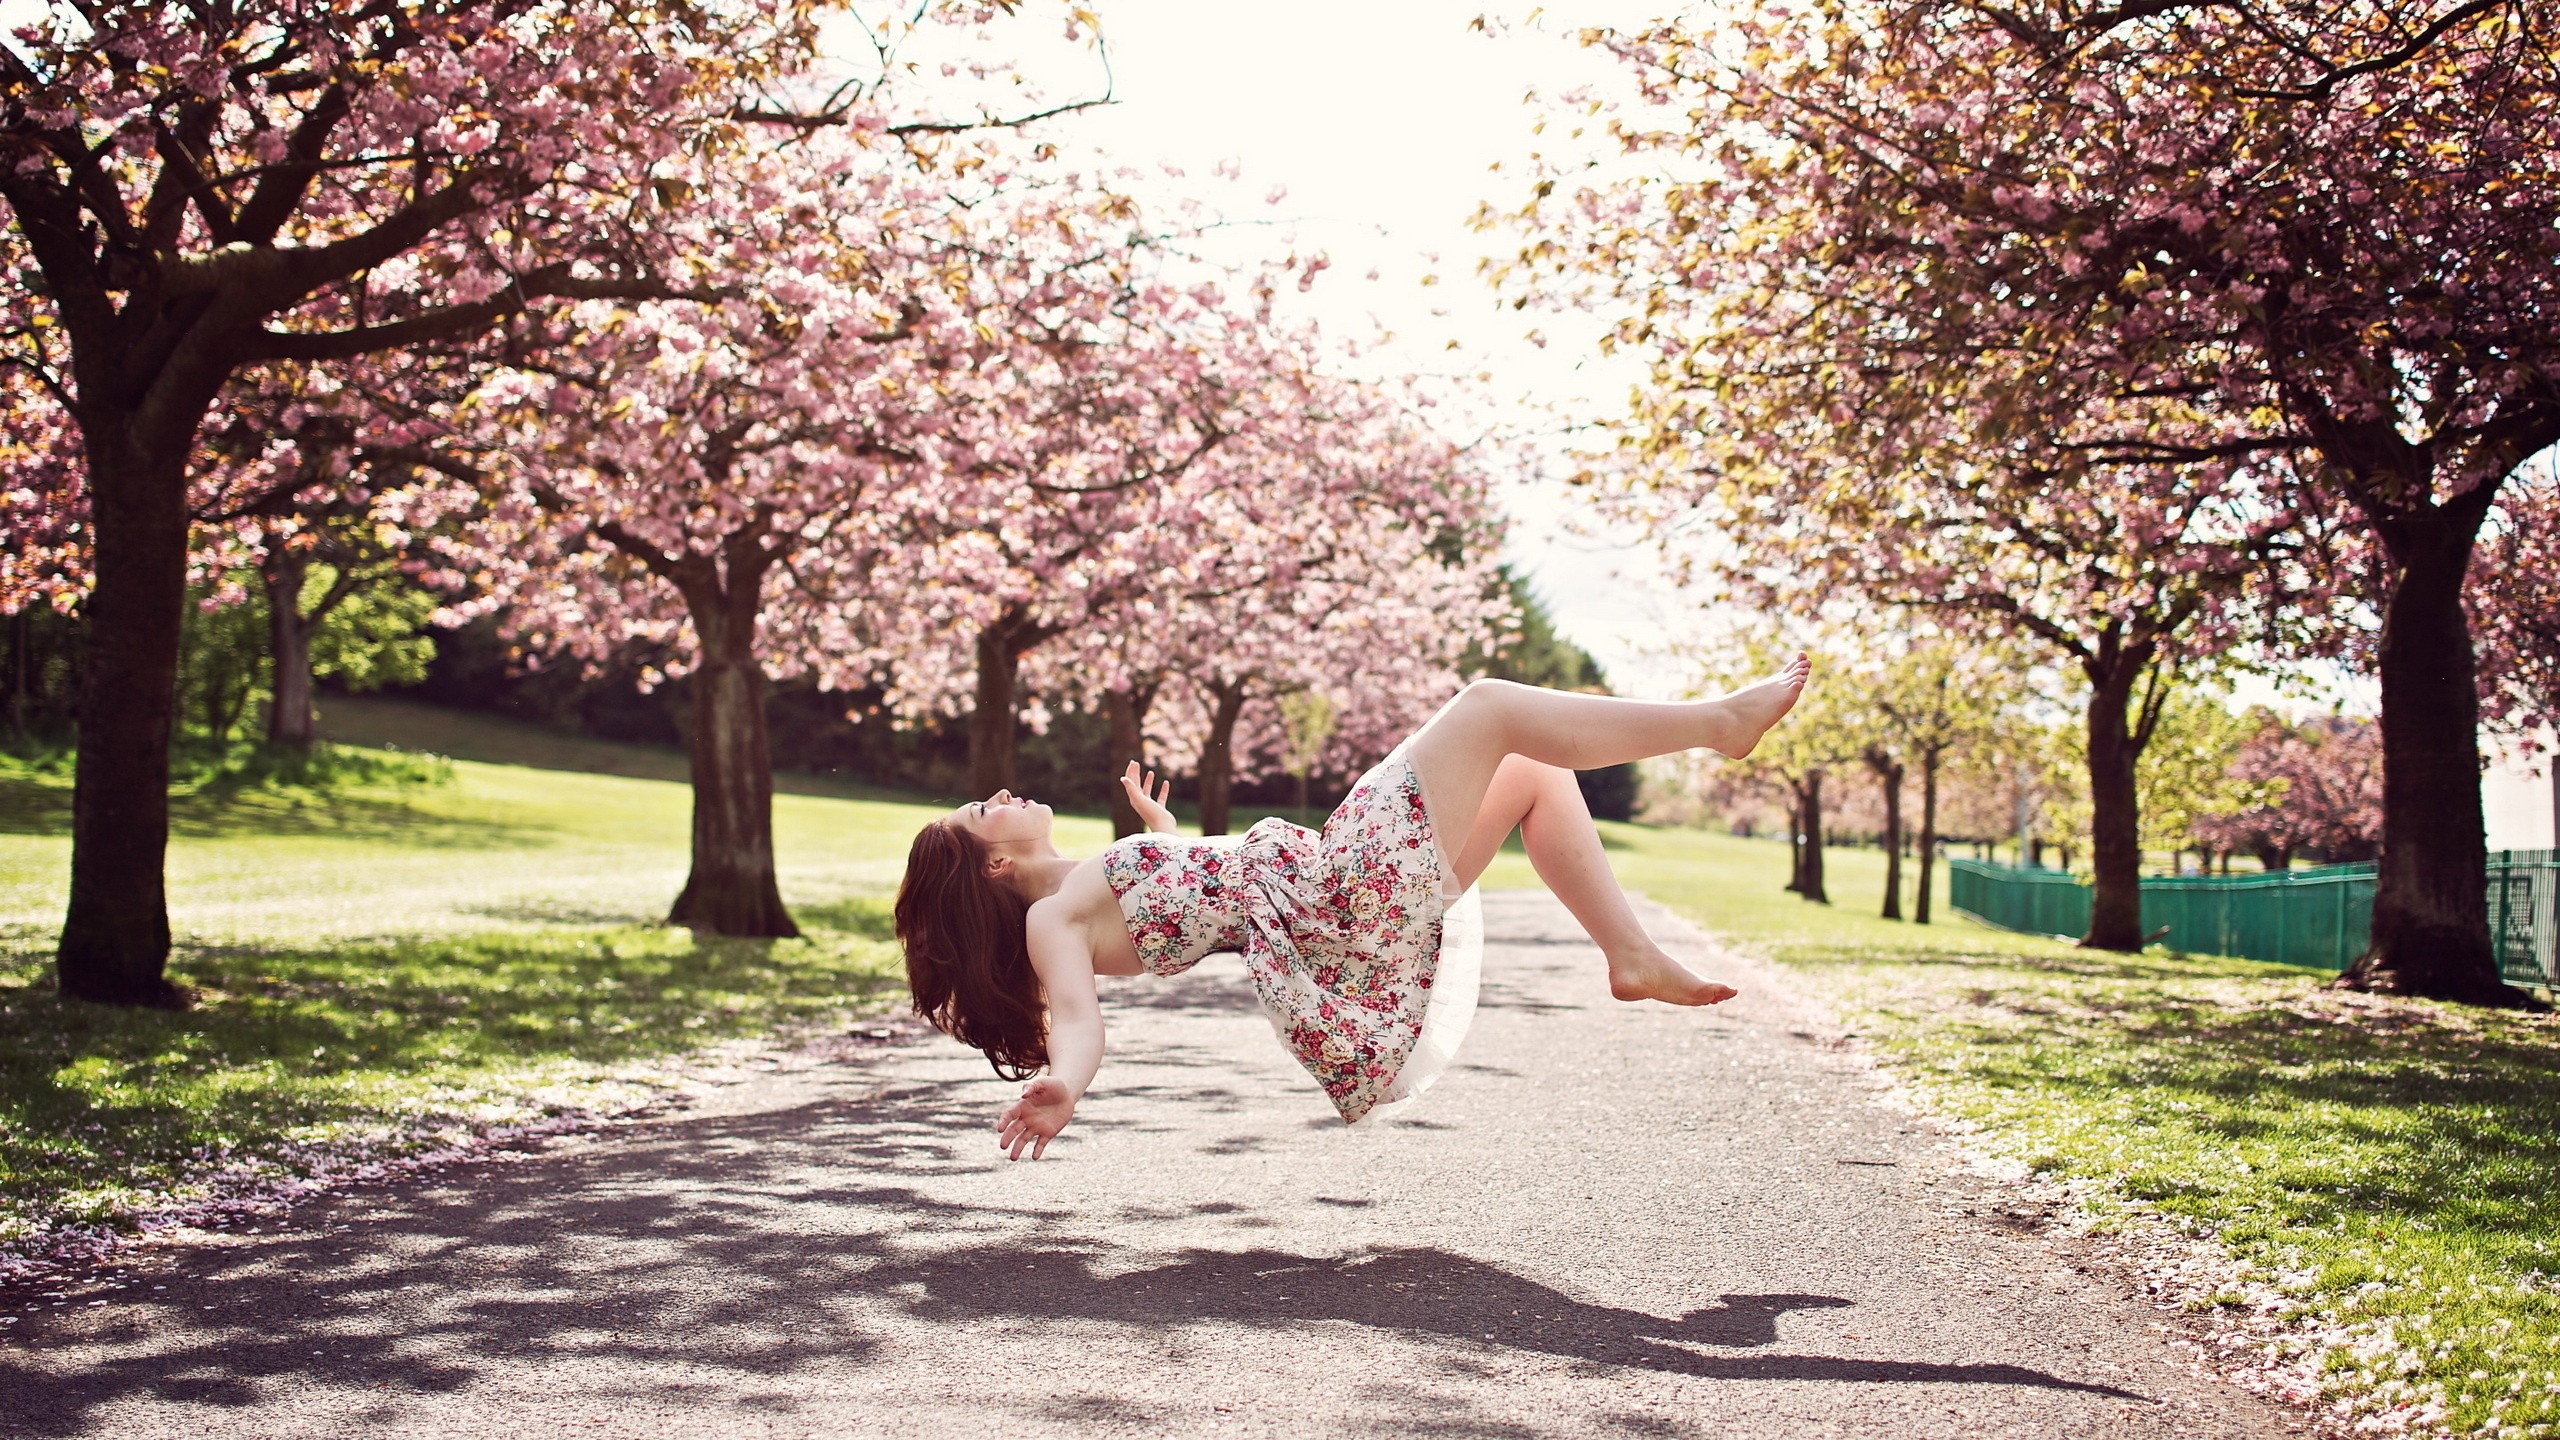 People 2560x1440 women model brunette long hair flying floating women outdoors trees road dress shadow magic grass park closed eyes barefoot bare shoulders open mouth blossoms Asian cherry blossom photography photoshopped